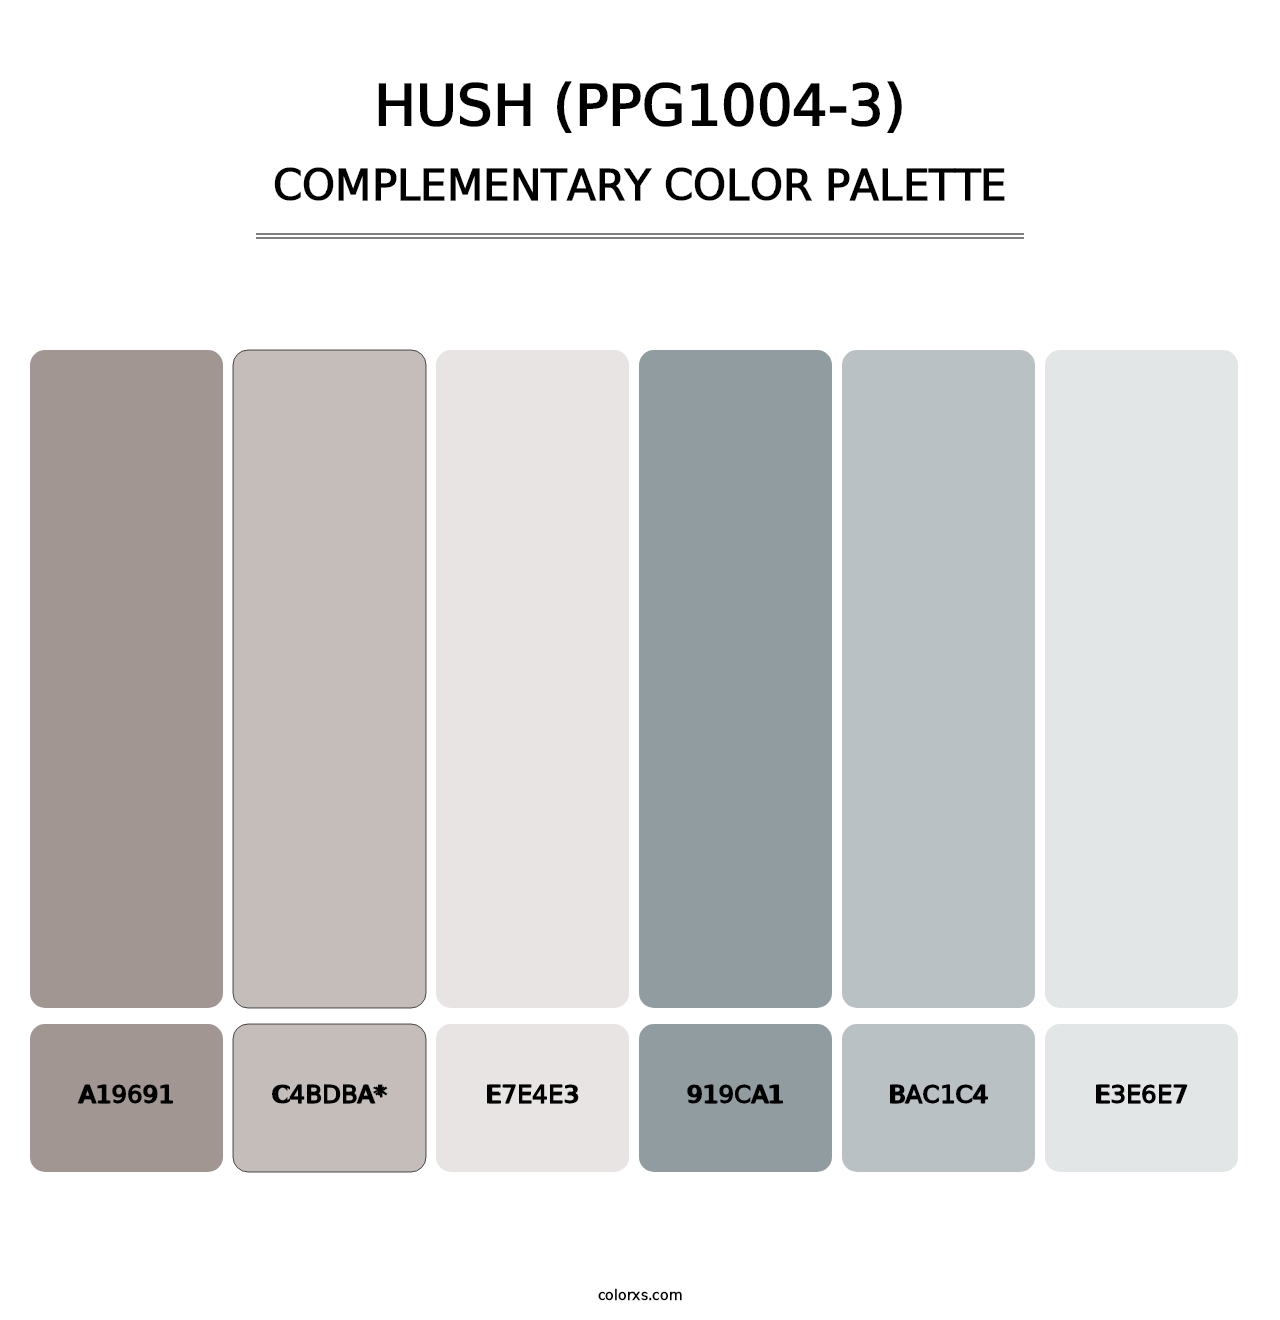 Hush (PPG1004-3) - Complementary Color Palette